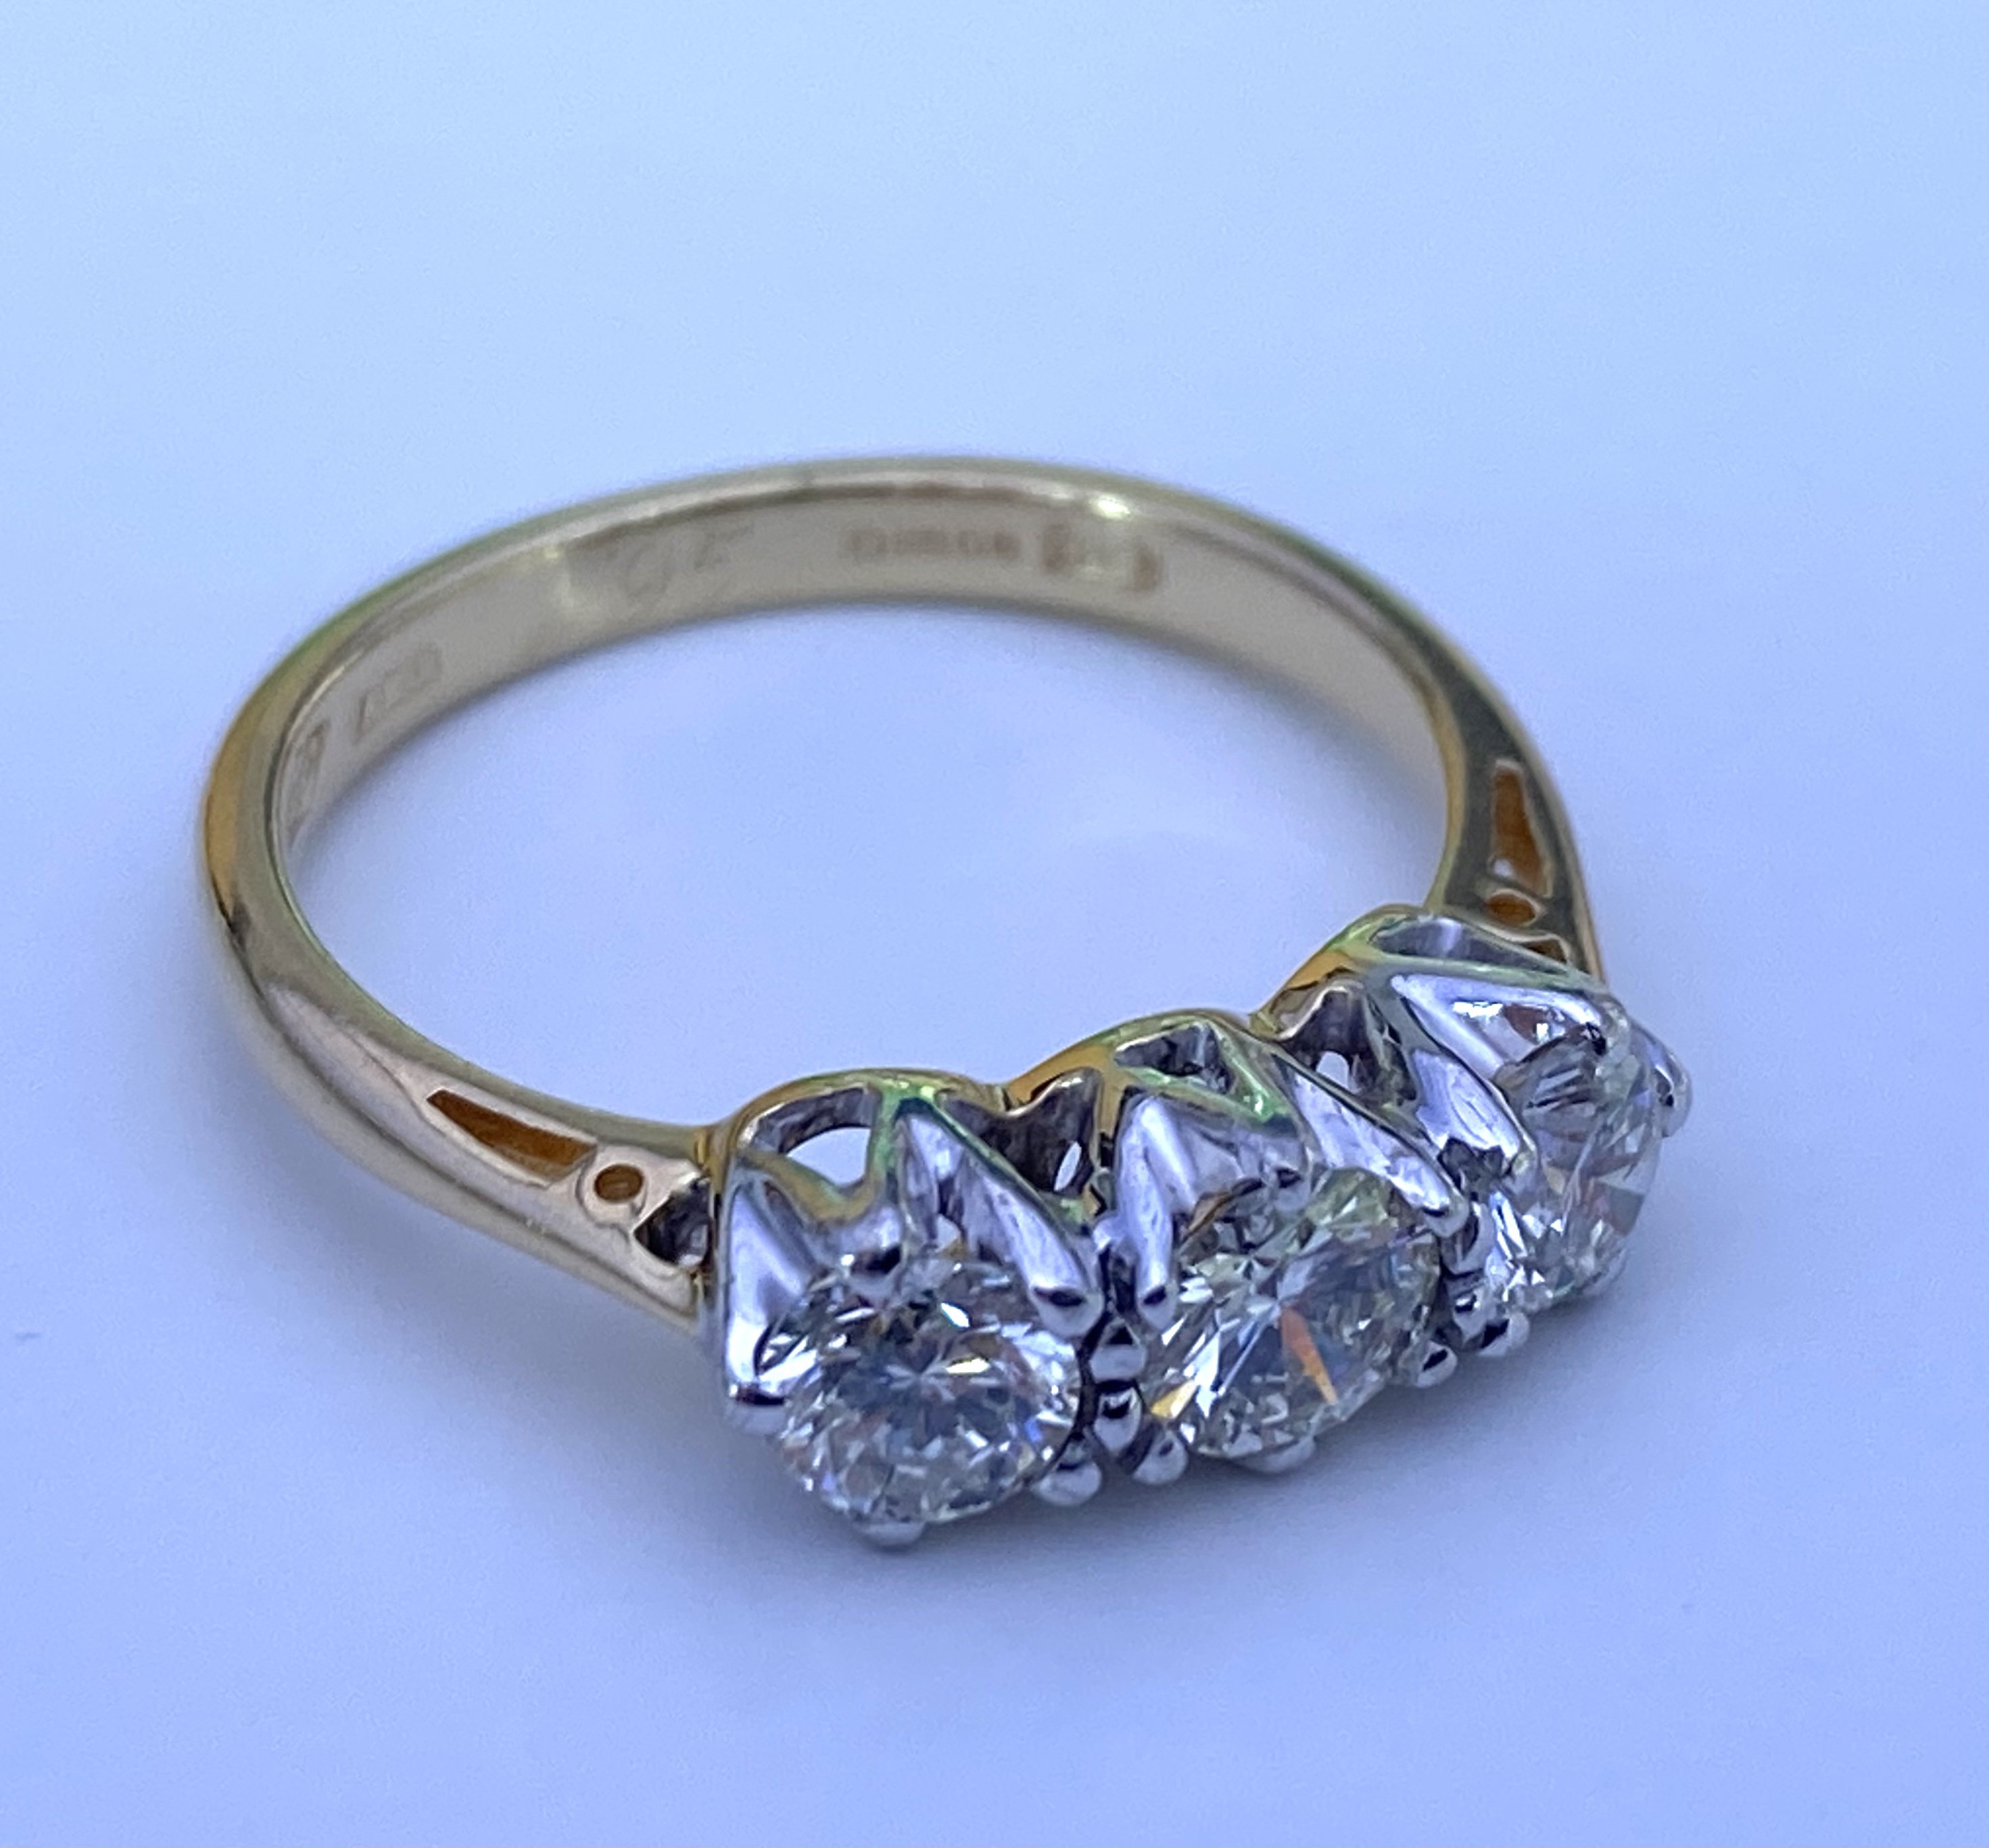 A Certificated 18ct white and yellow gold 3 stone